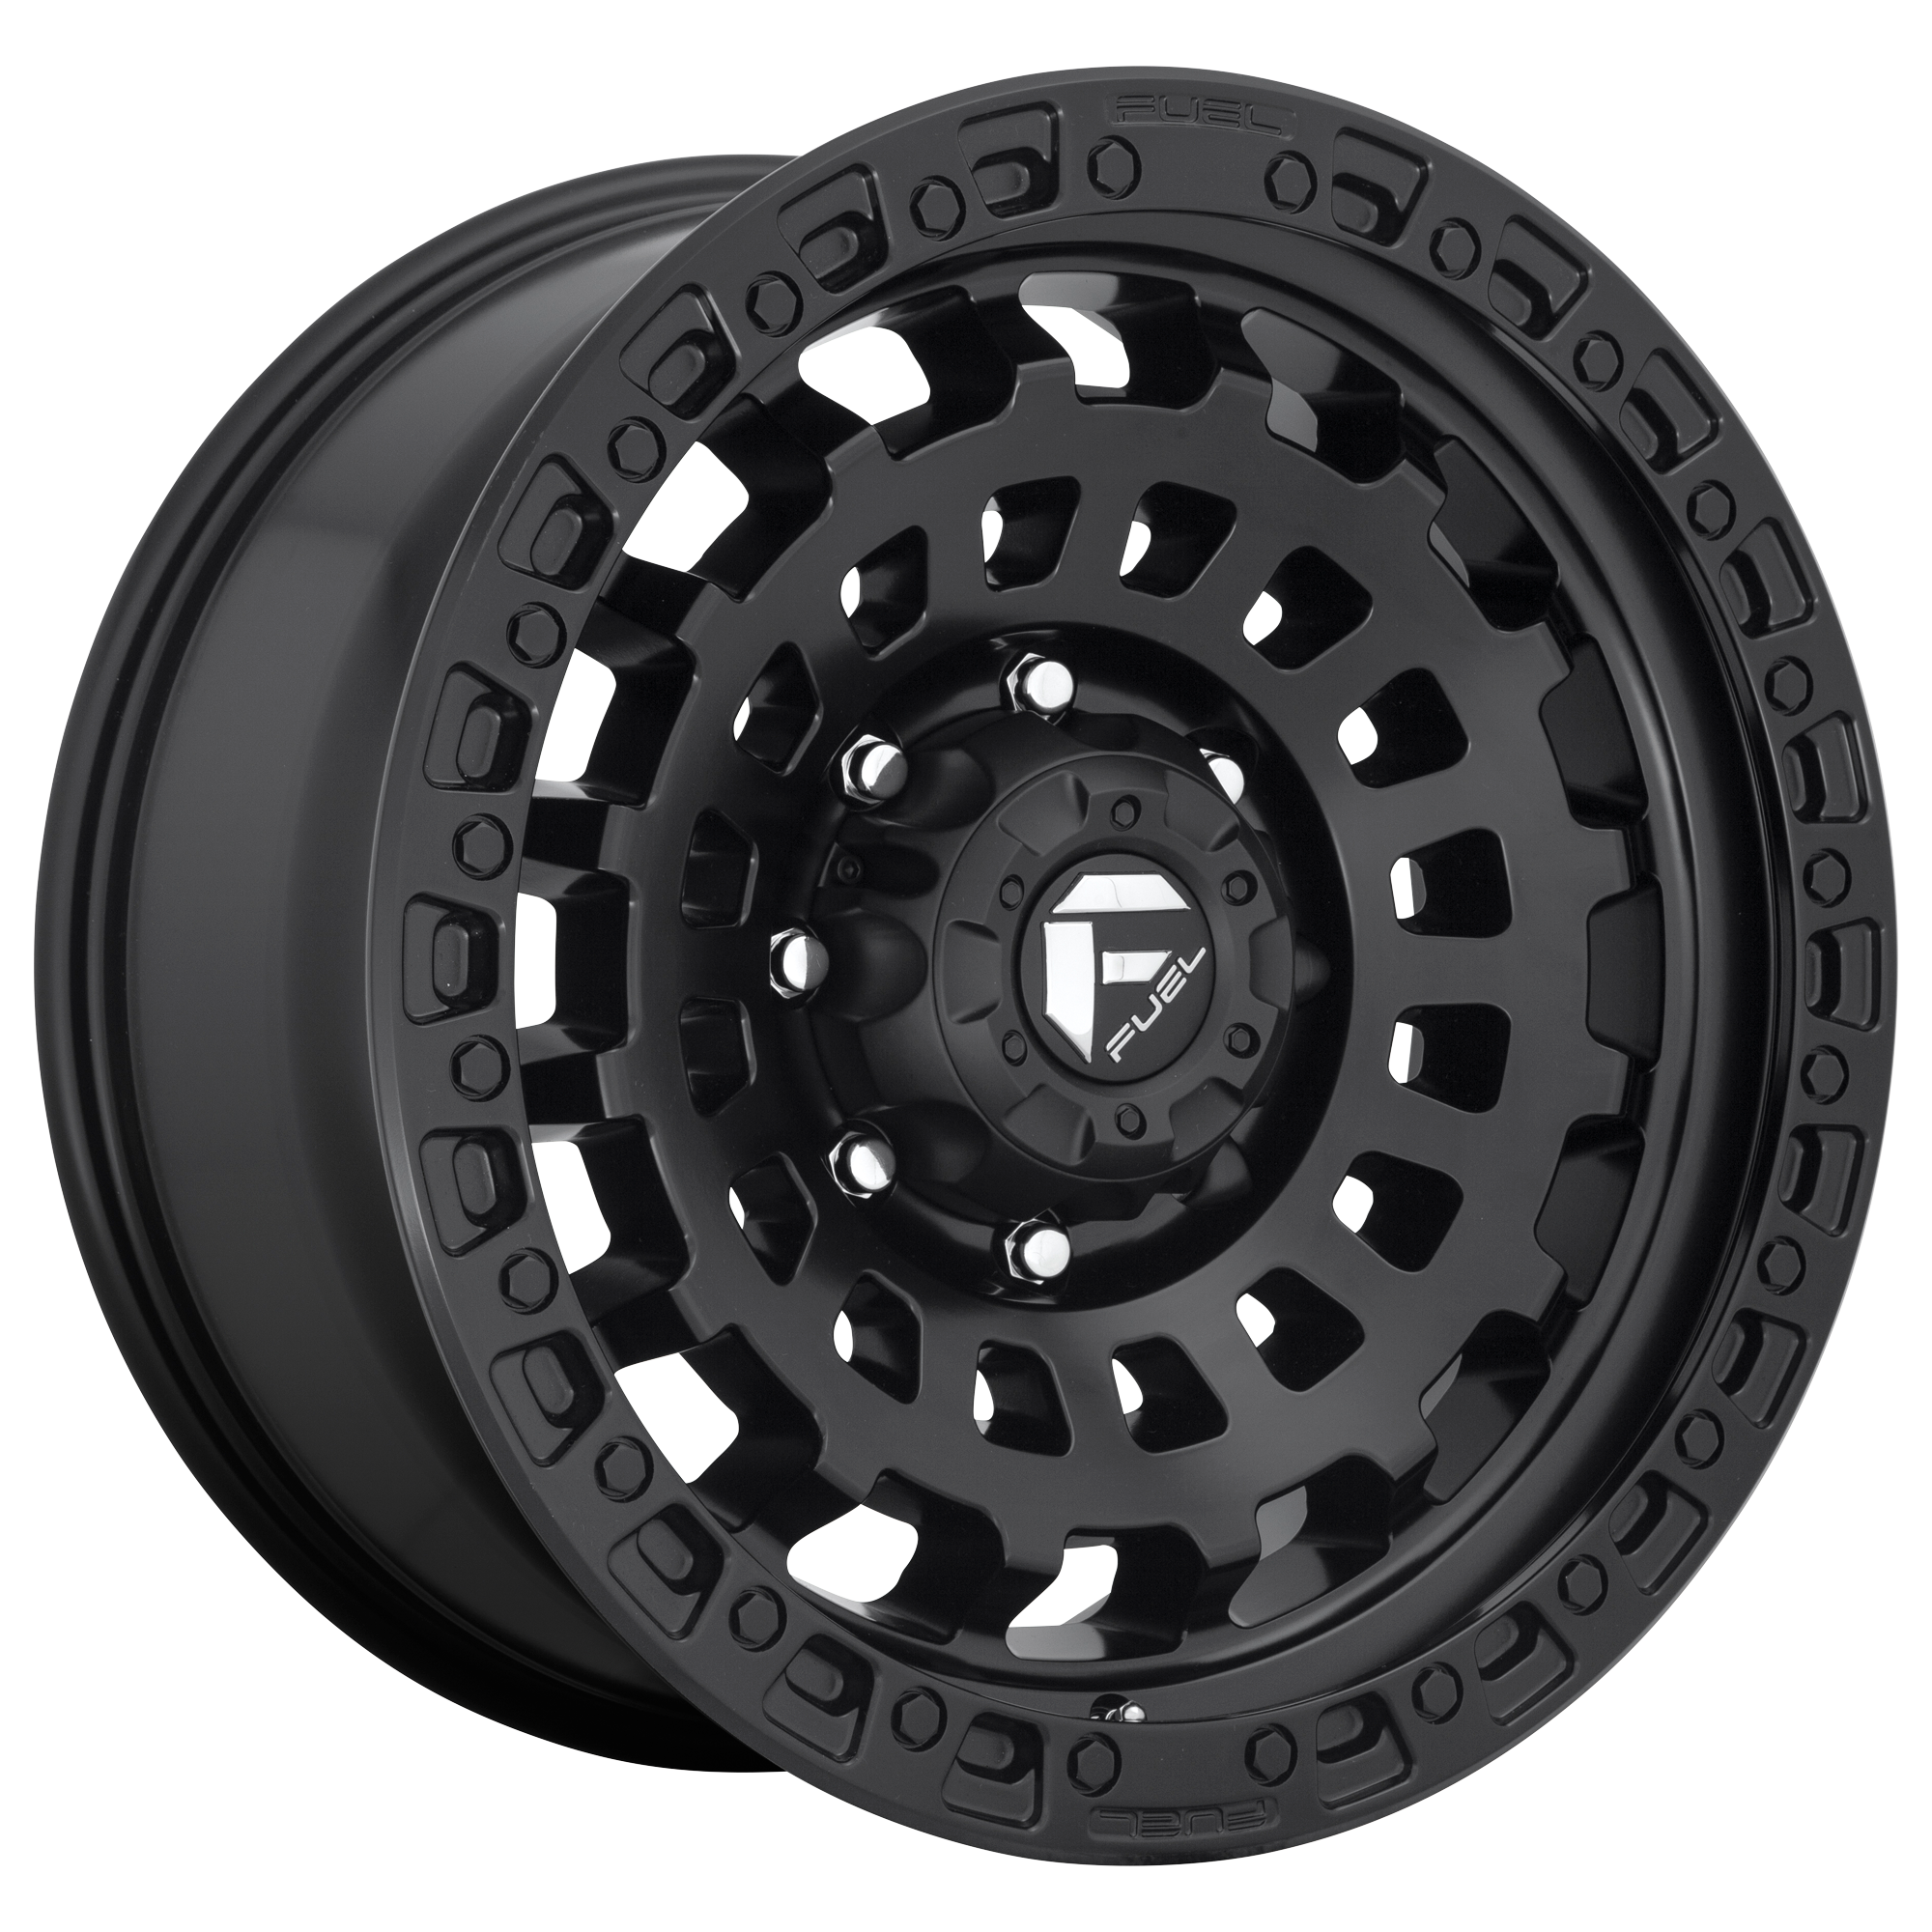 ZEPHYR 20x9 8x180.00 MATTE BLACK (1 mm) - Tires and Engine Performance